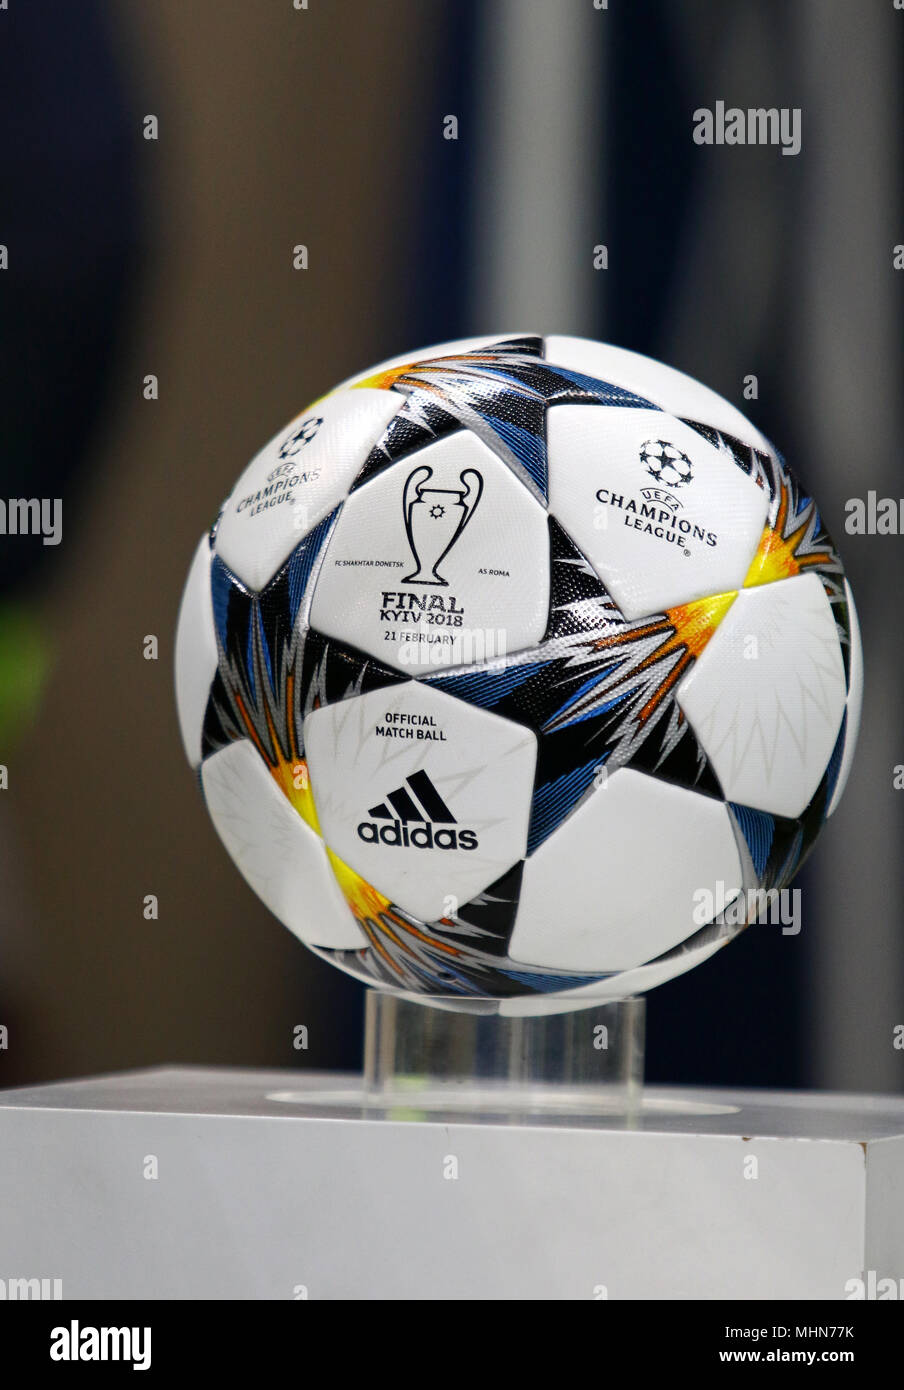 KHARKIV, UKRAINE - FEBRUARY 21, 2018: Official match ball of UEFA Champions League season 2017/18 on pedestal before Champions League Round of 16 game Stock Photo